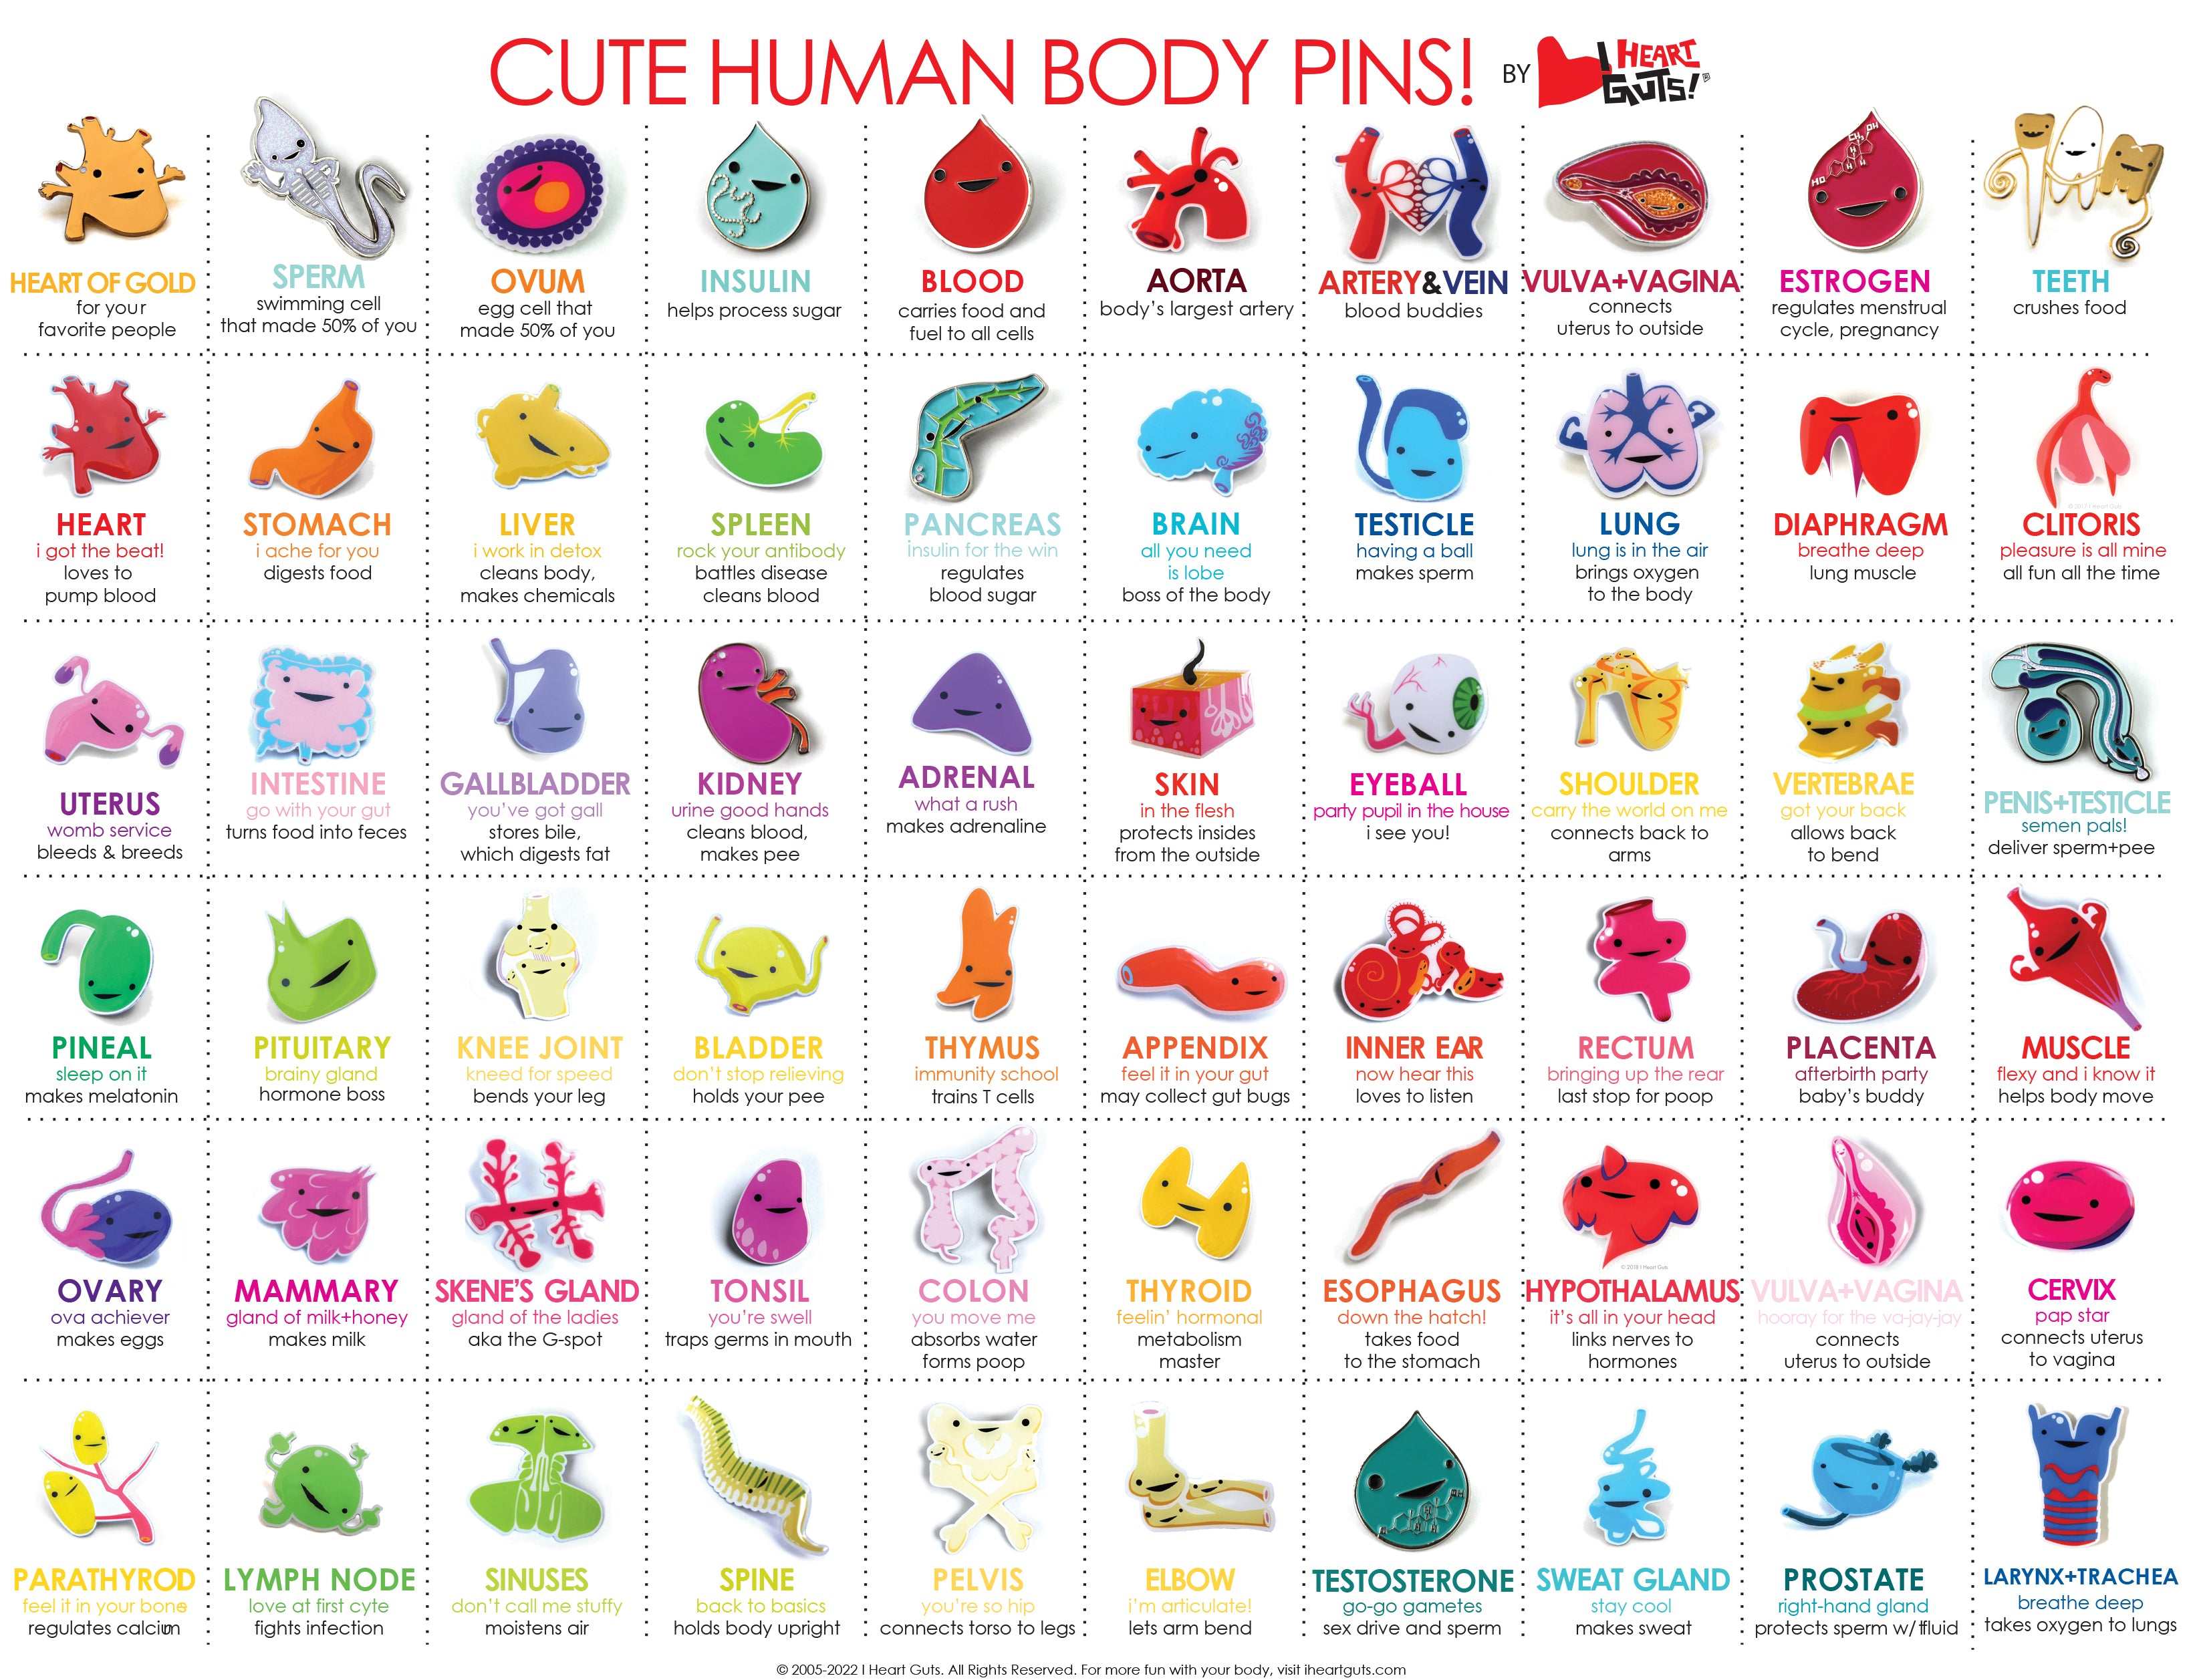 Our Human Body Pin Family Has Grown!